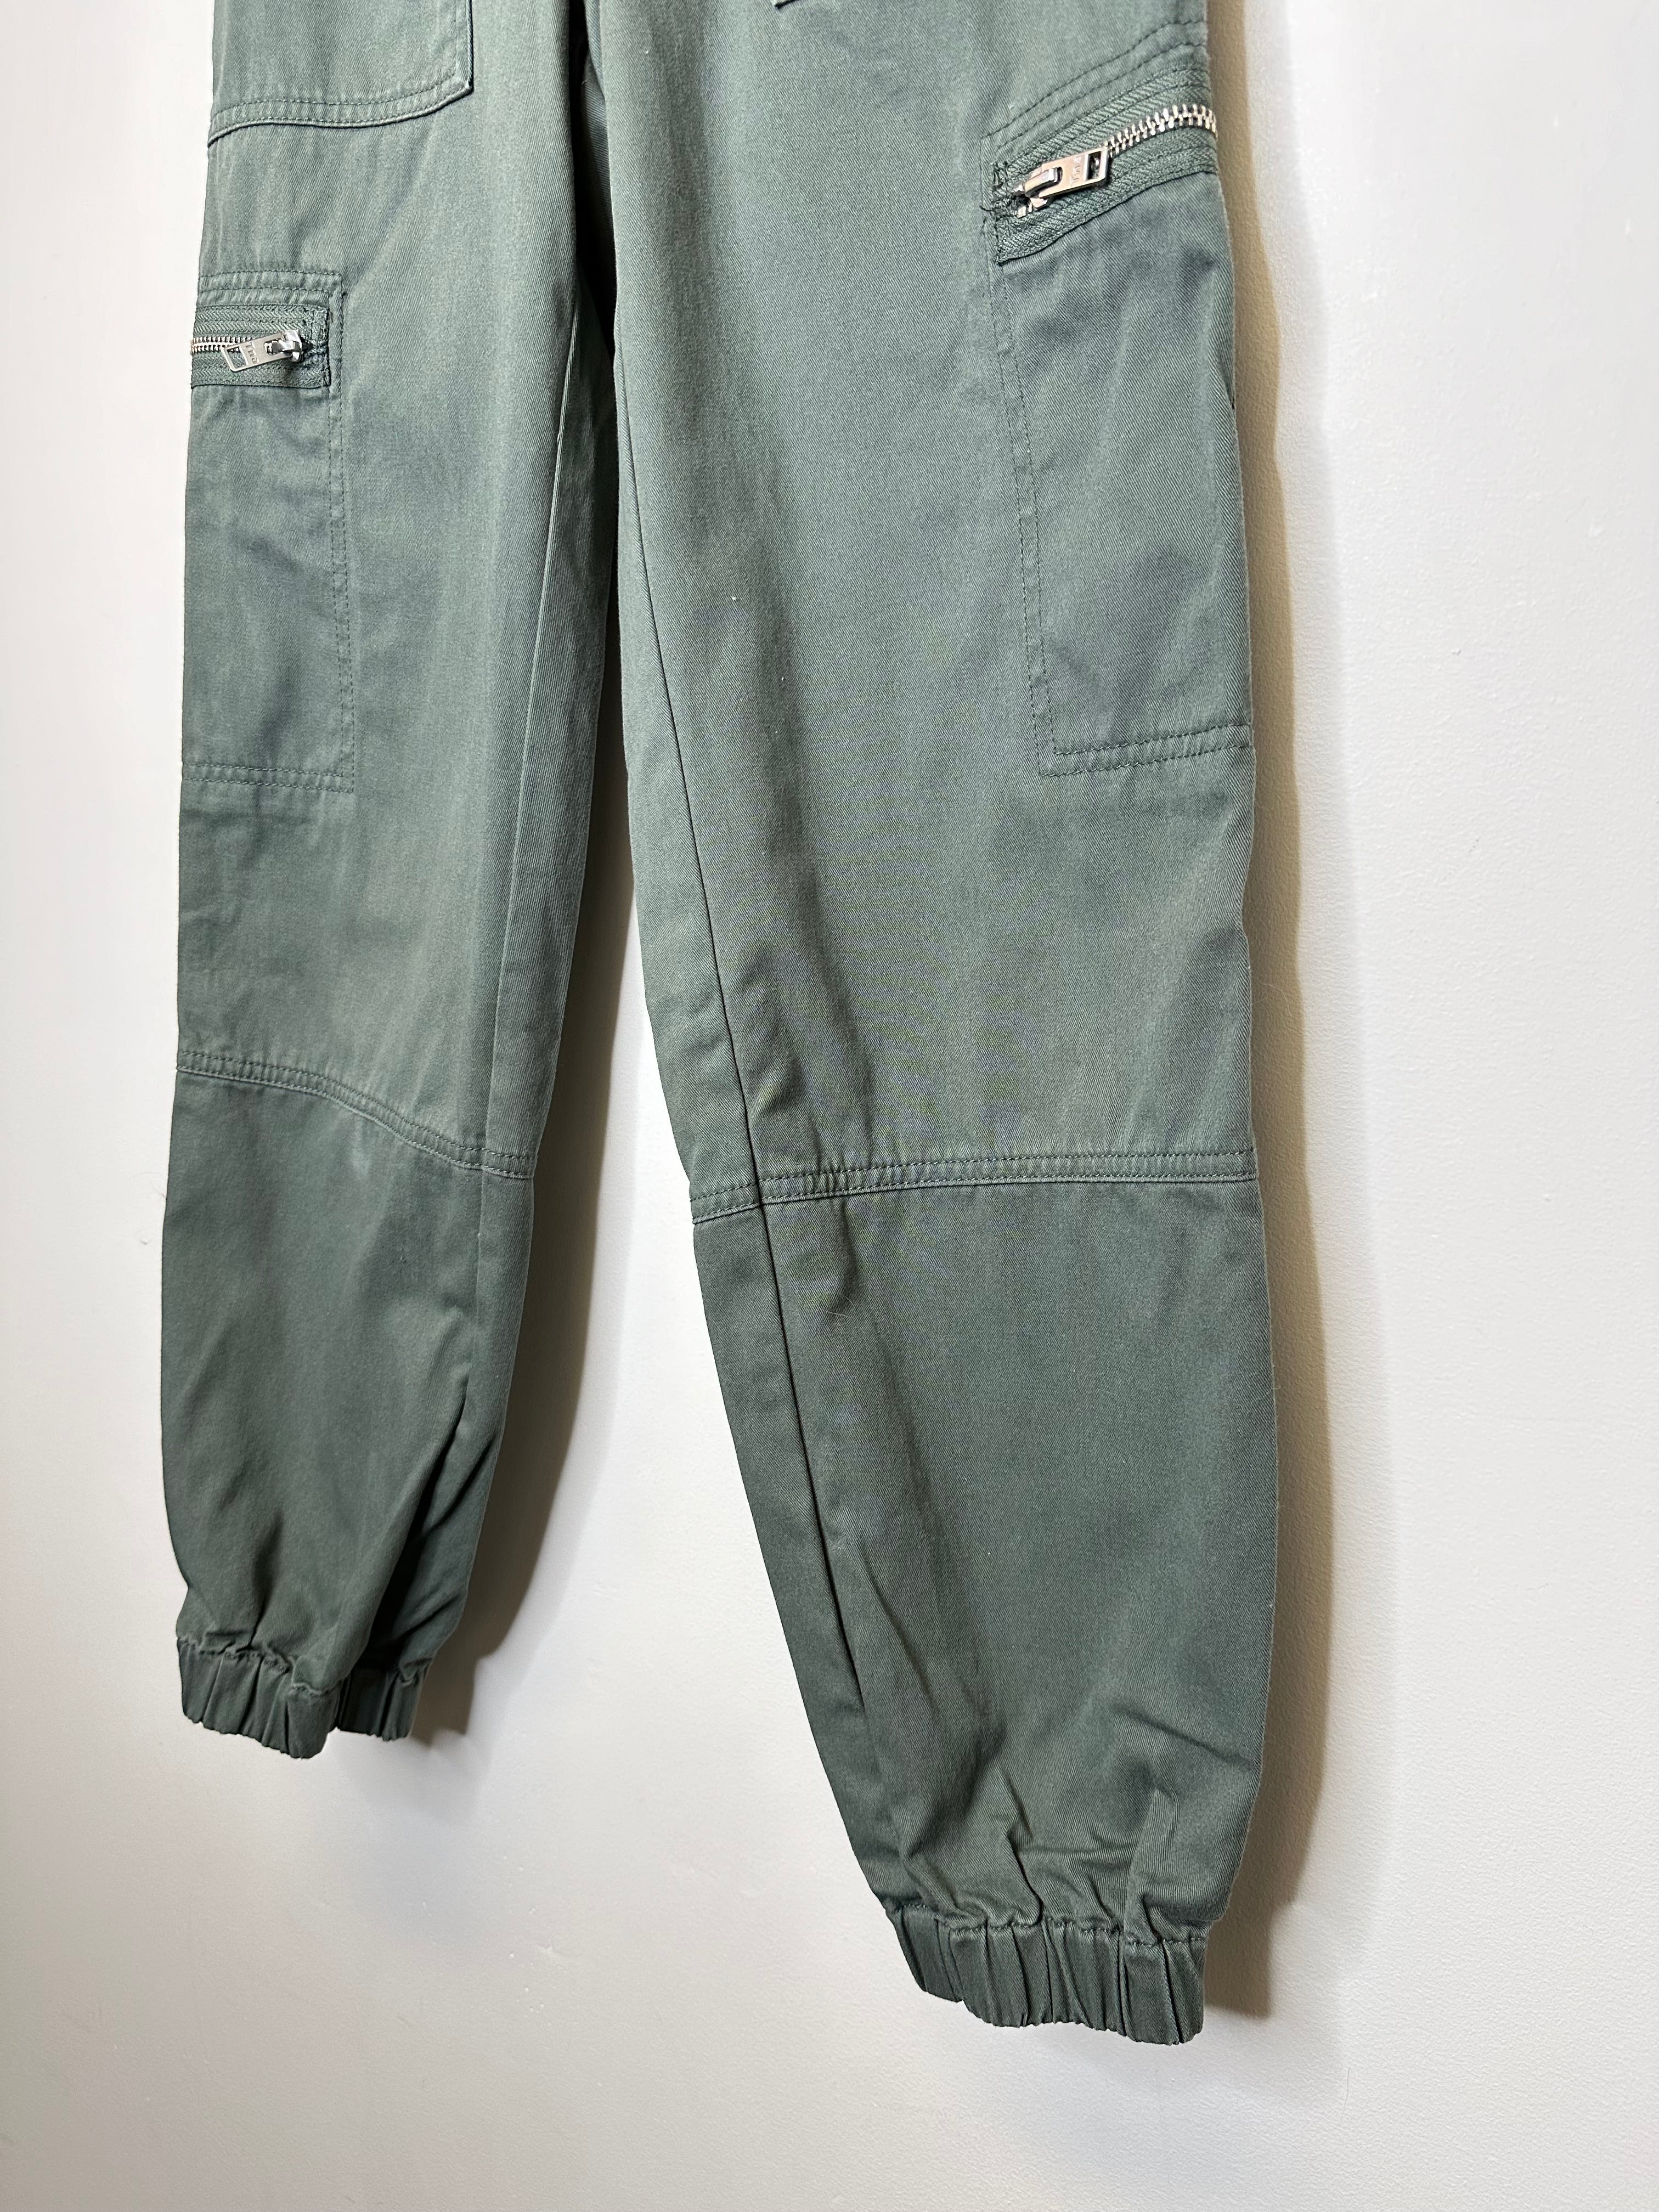 TNA Green Cargo Pants - XS - AS IS